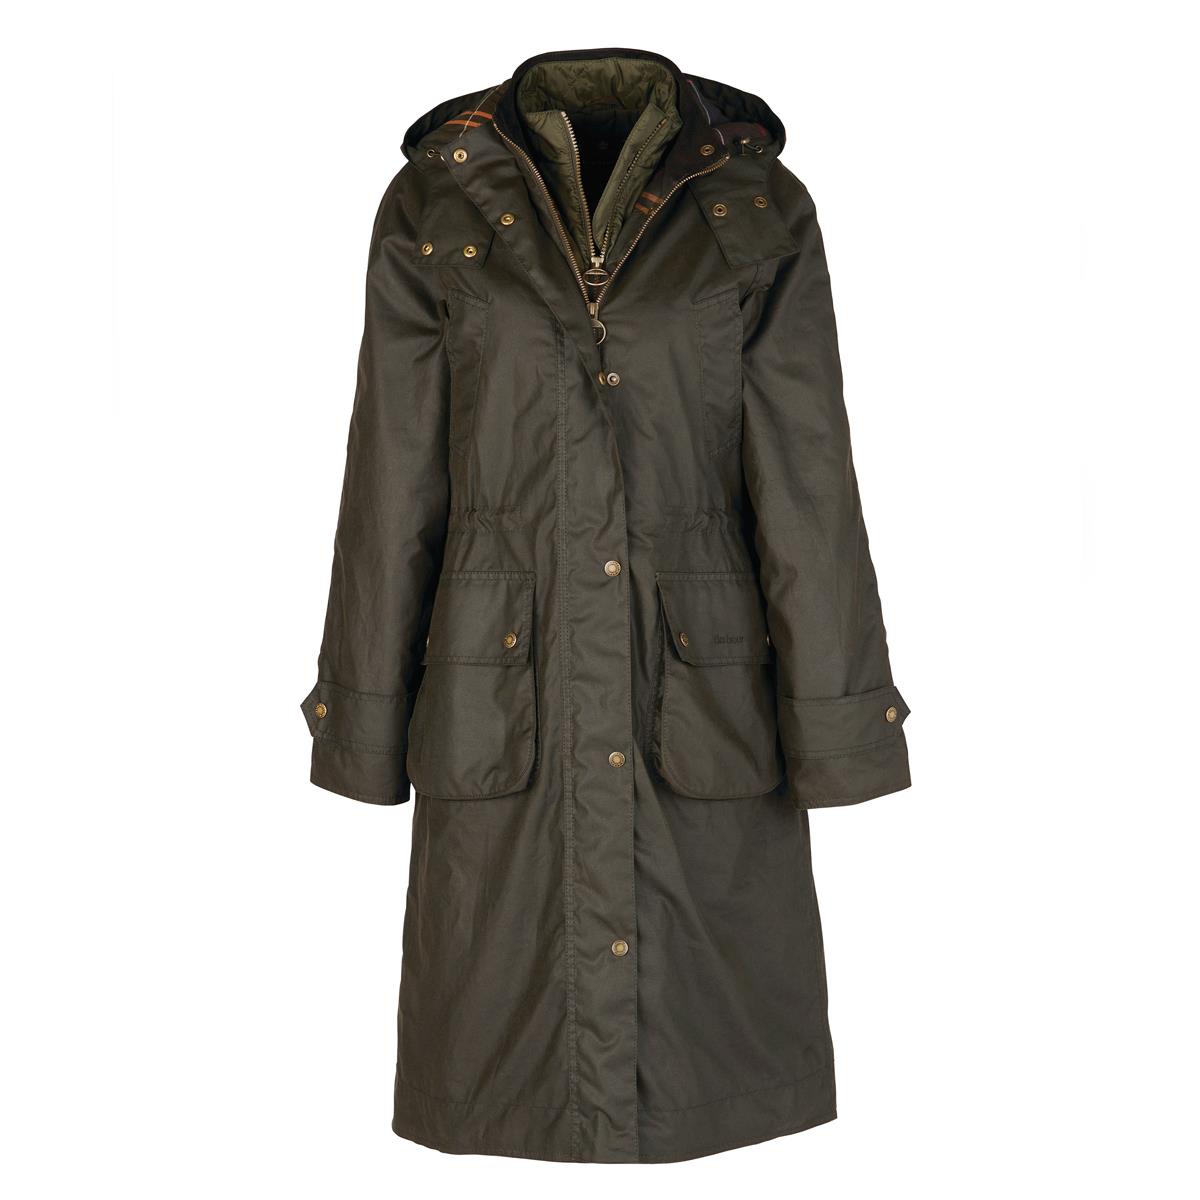 What is the recommended cleaning method for the Barbour Long Cannich Wax Jacket?